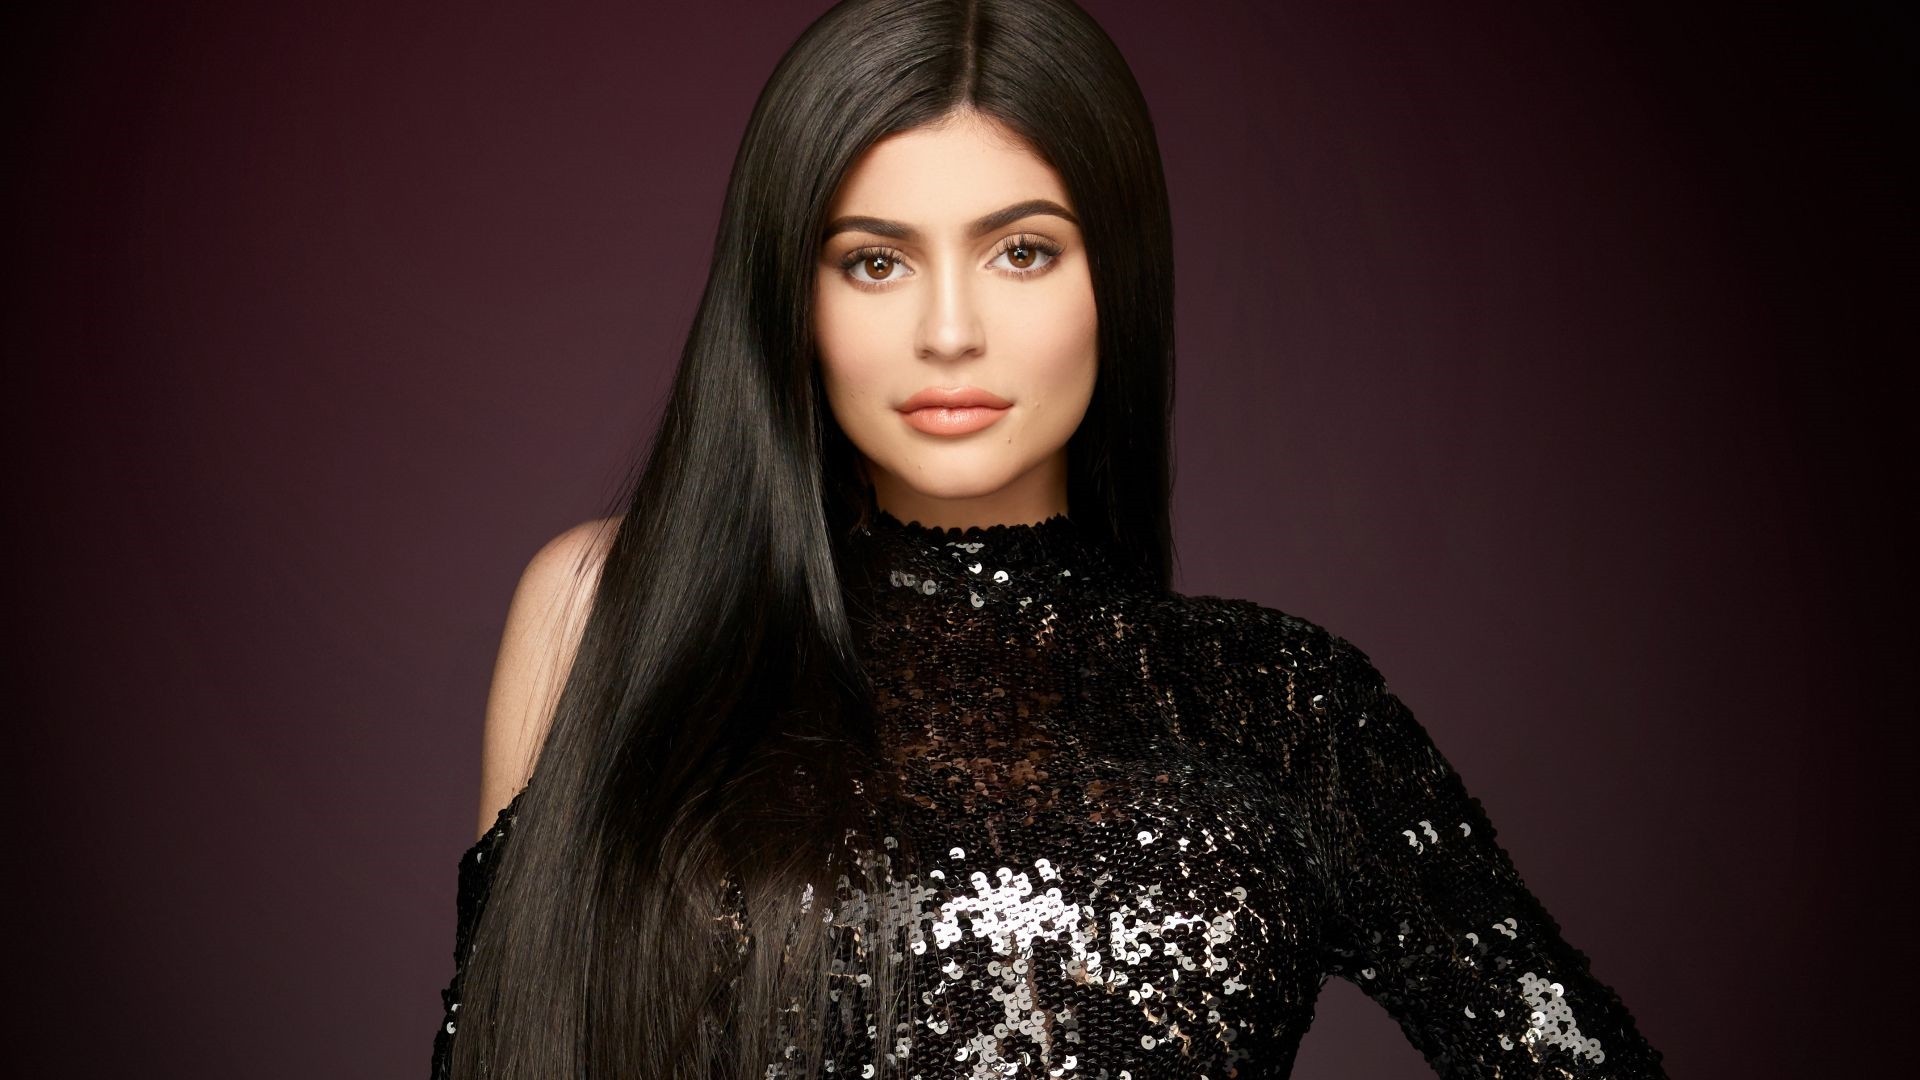 Kylie Jenner Wallpaper and Background